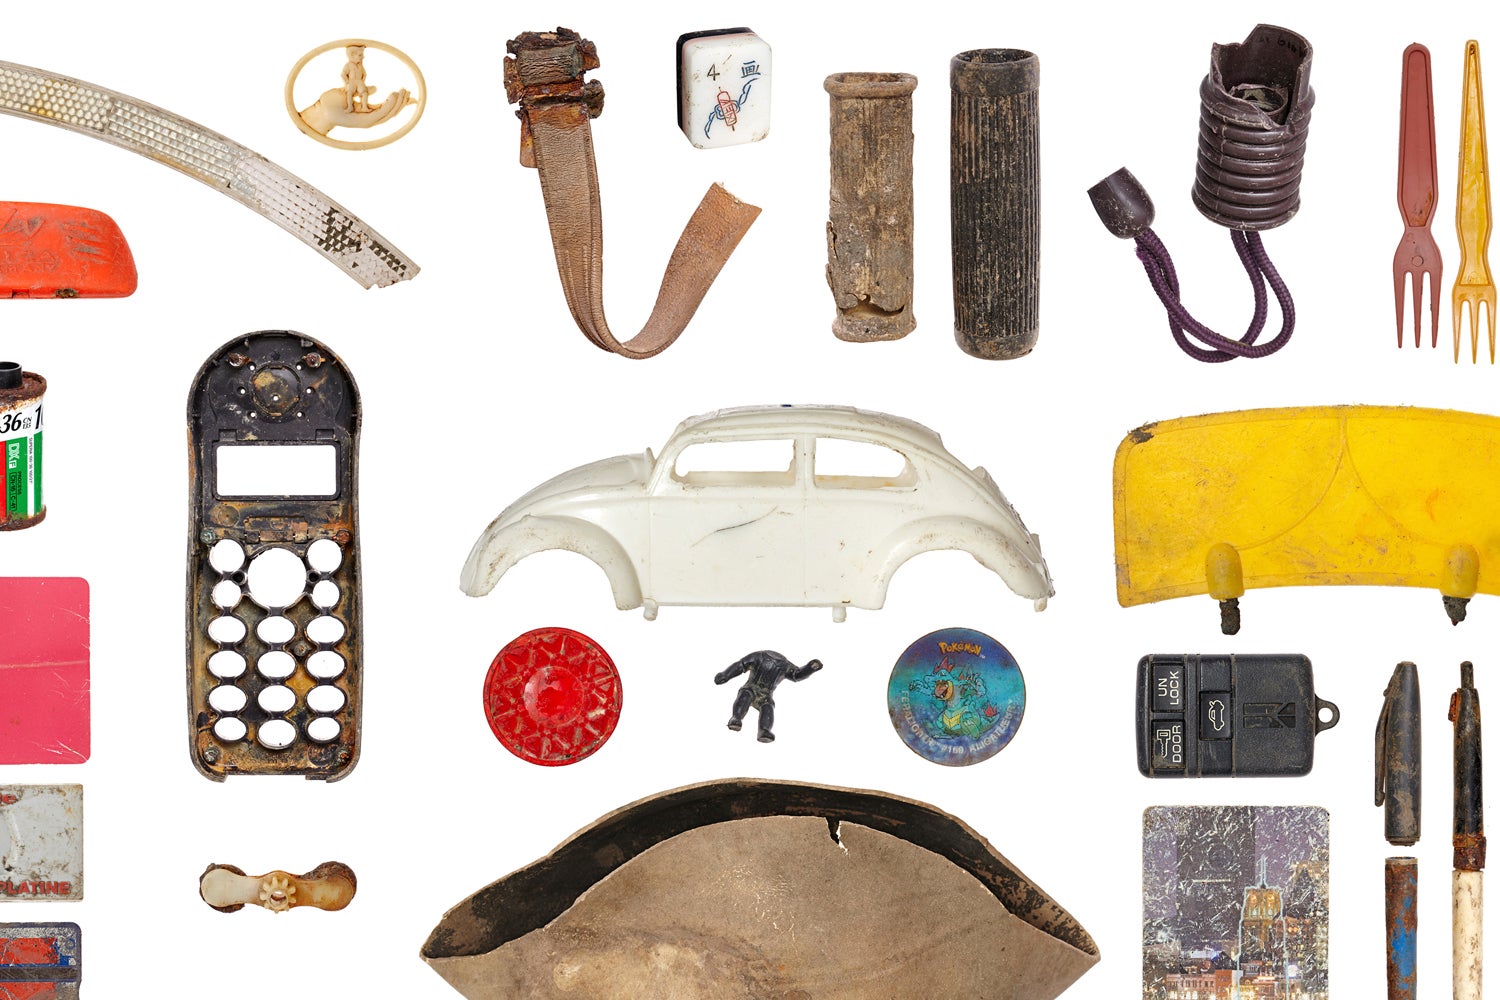 A selection of objects found during the dig.